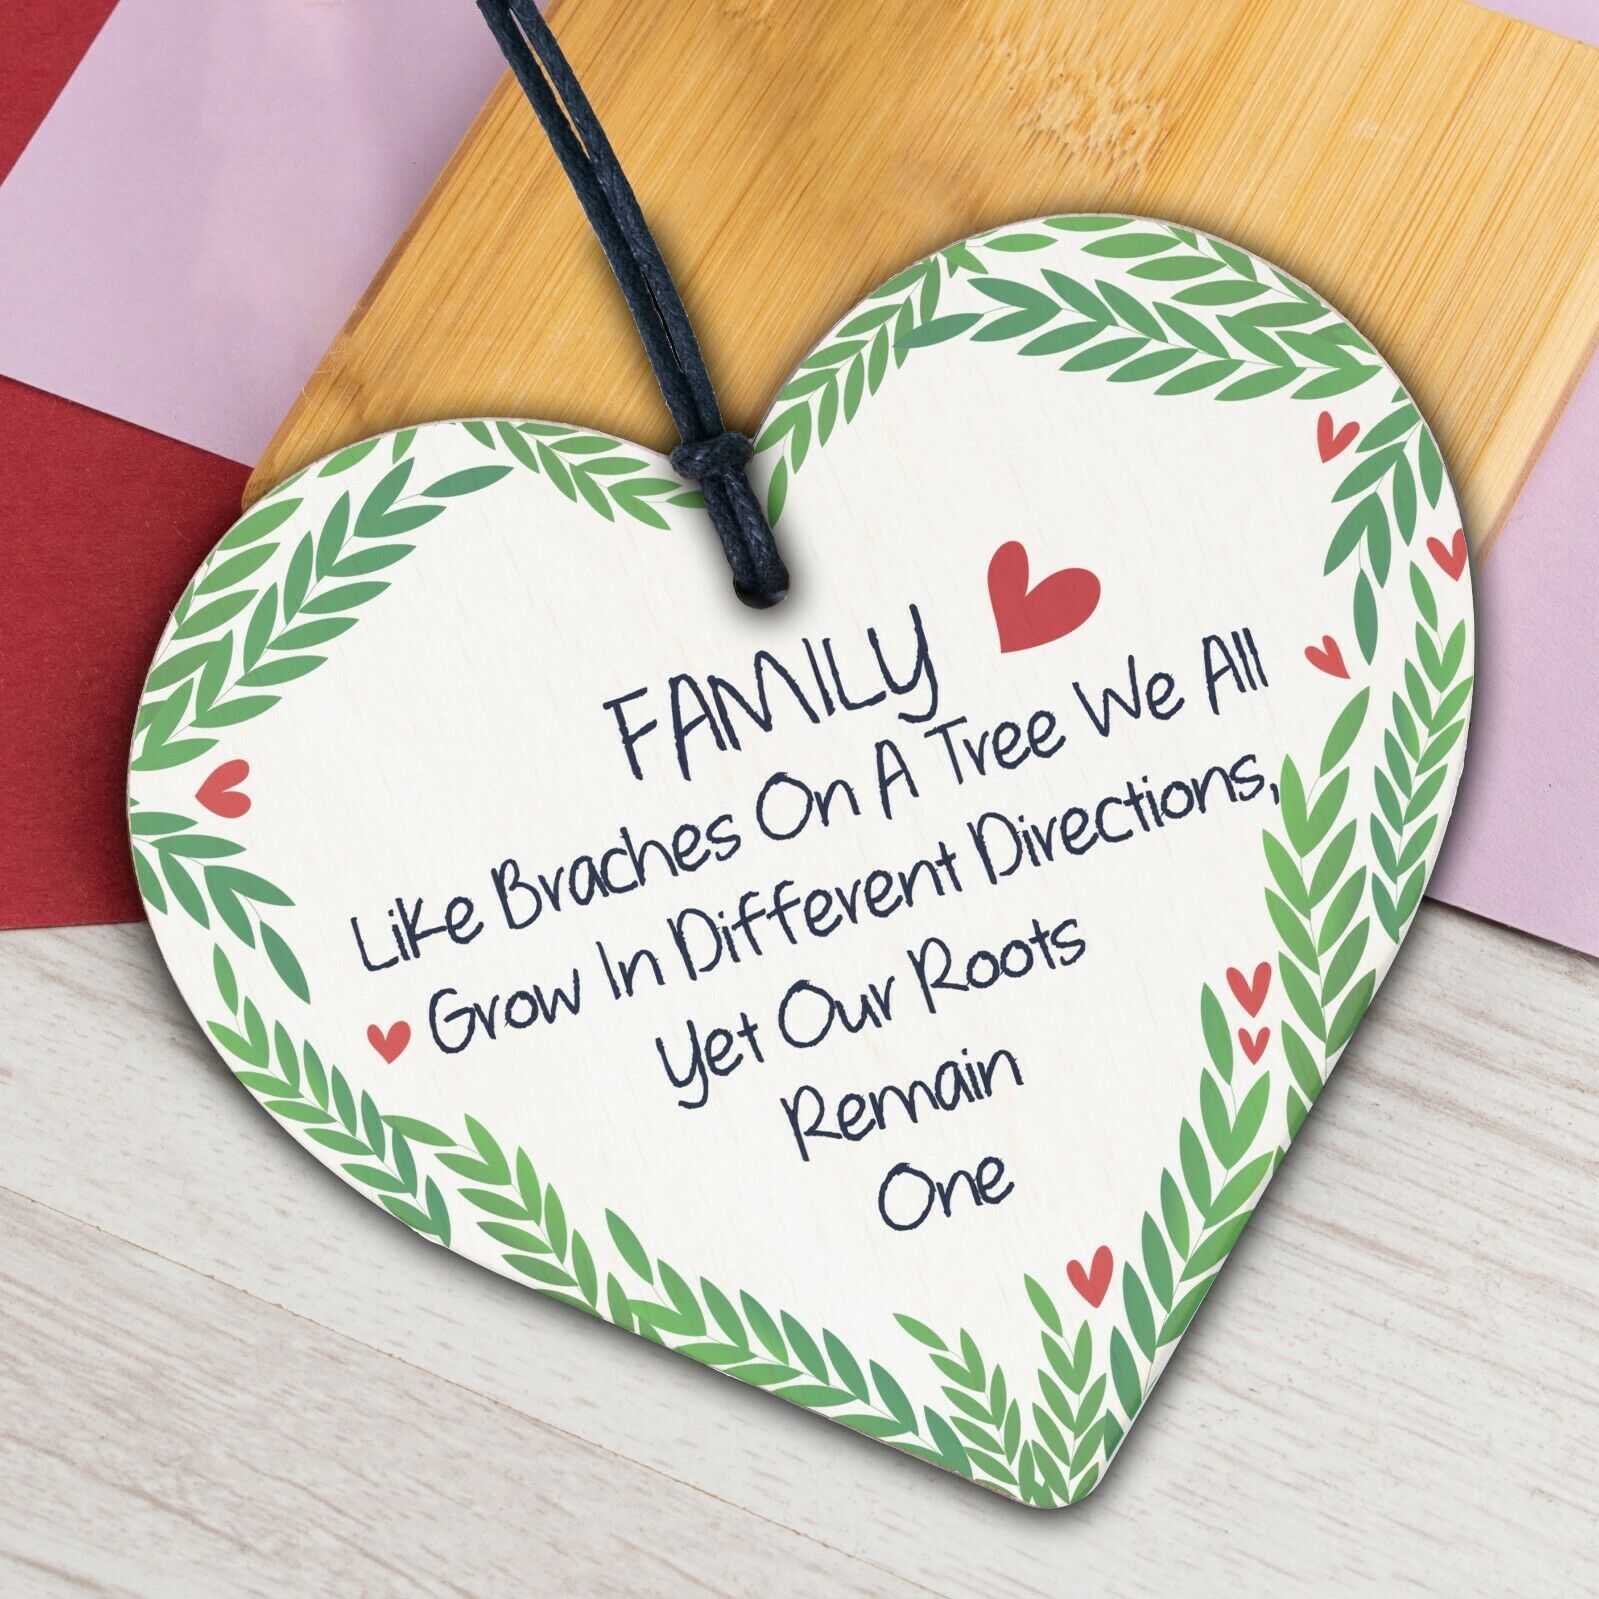 Family Roots Remain One Wooden Hanging Heart Shaped Families Plaque Love Gift